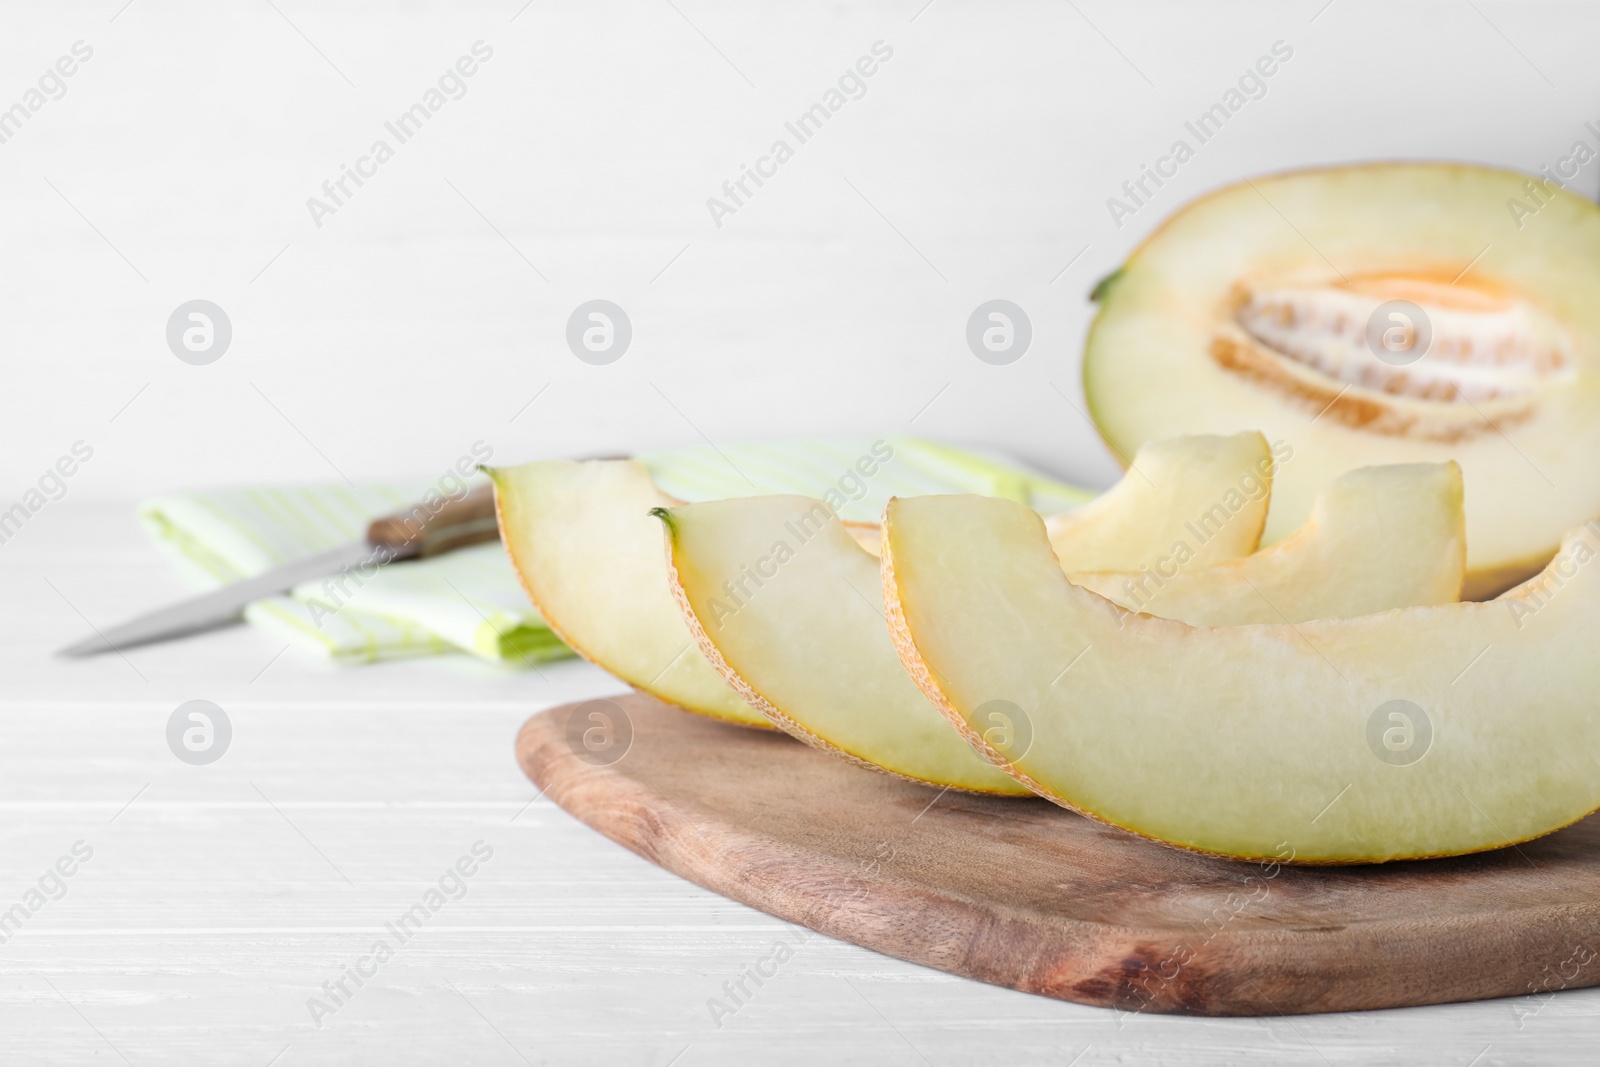 Photo of Pieces of delicious honeydew melon on white wooden table